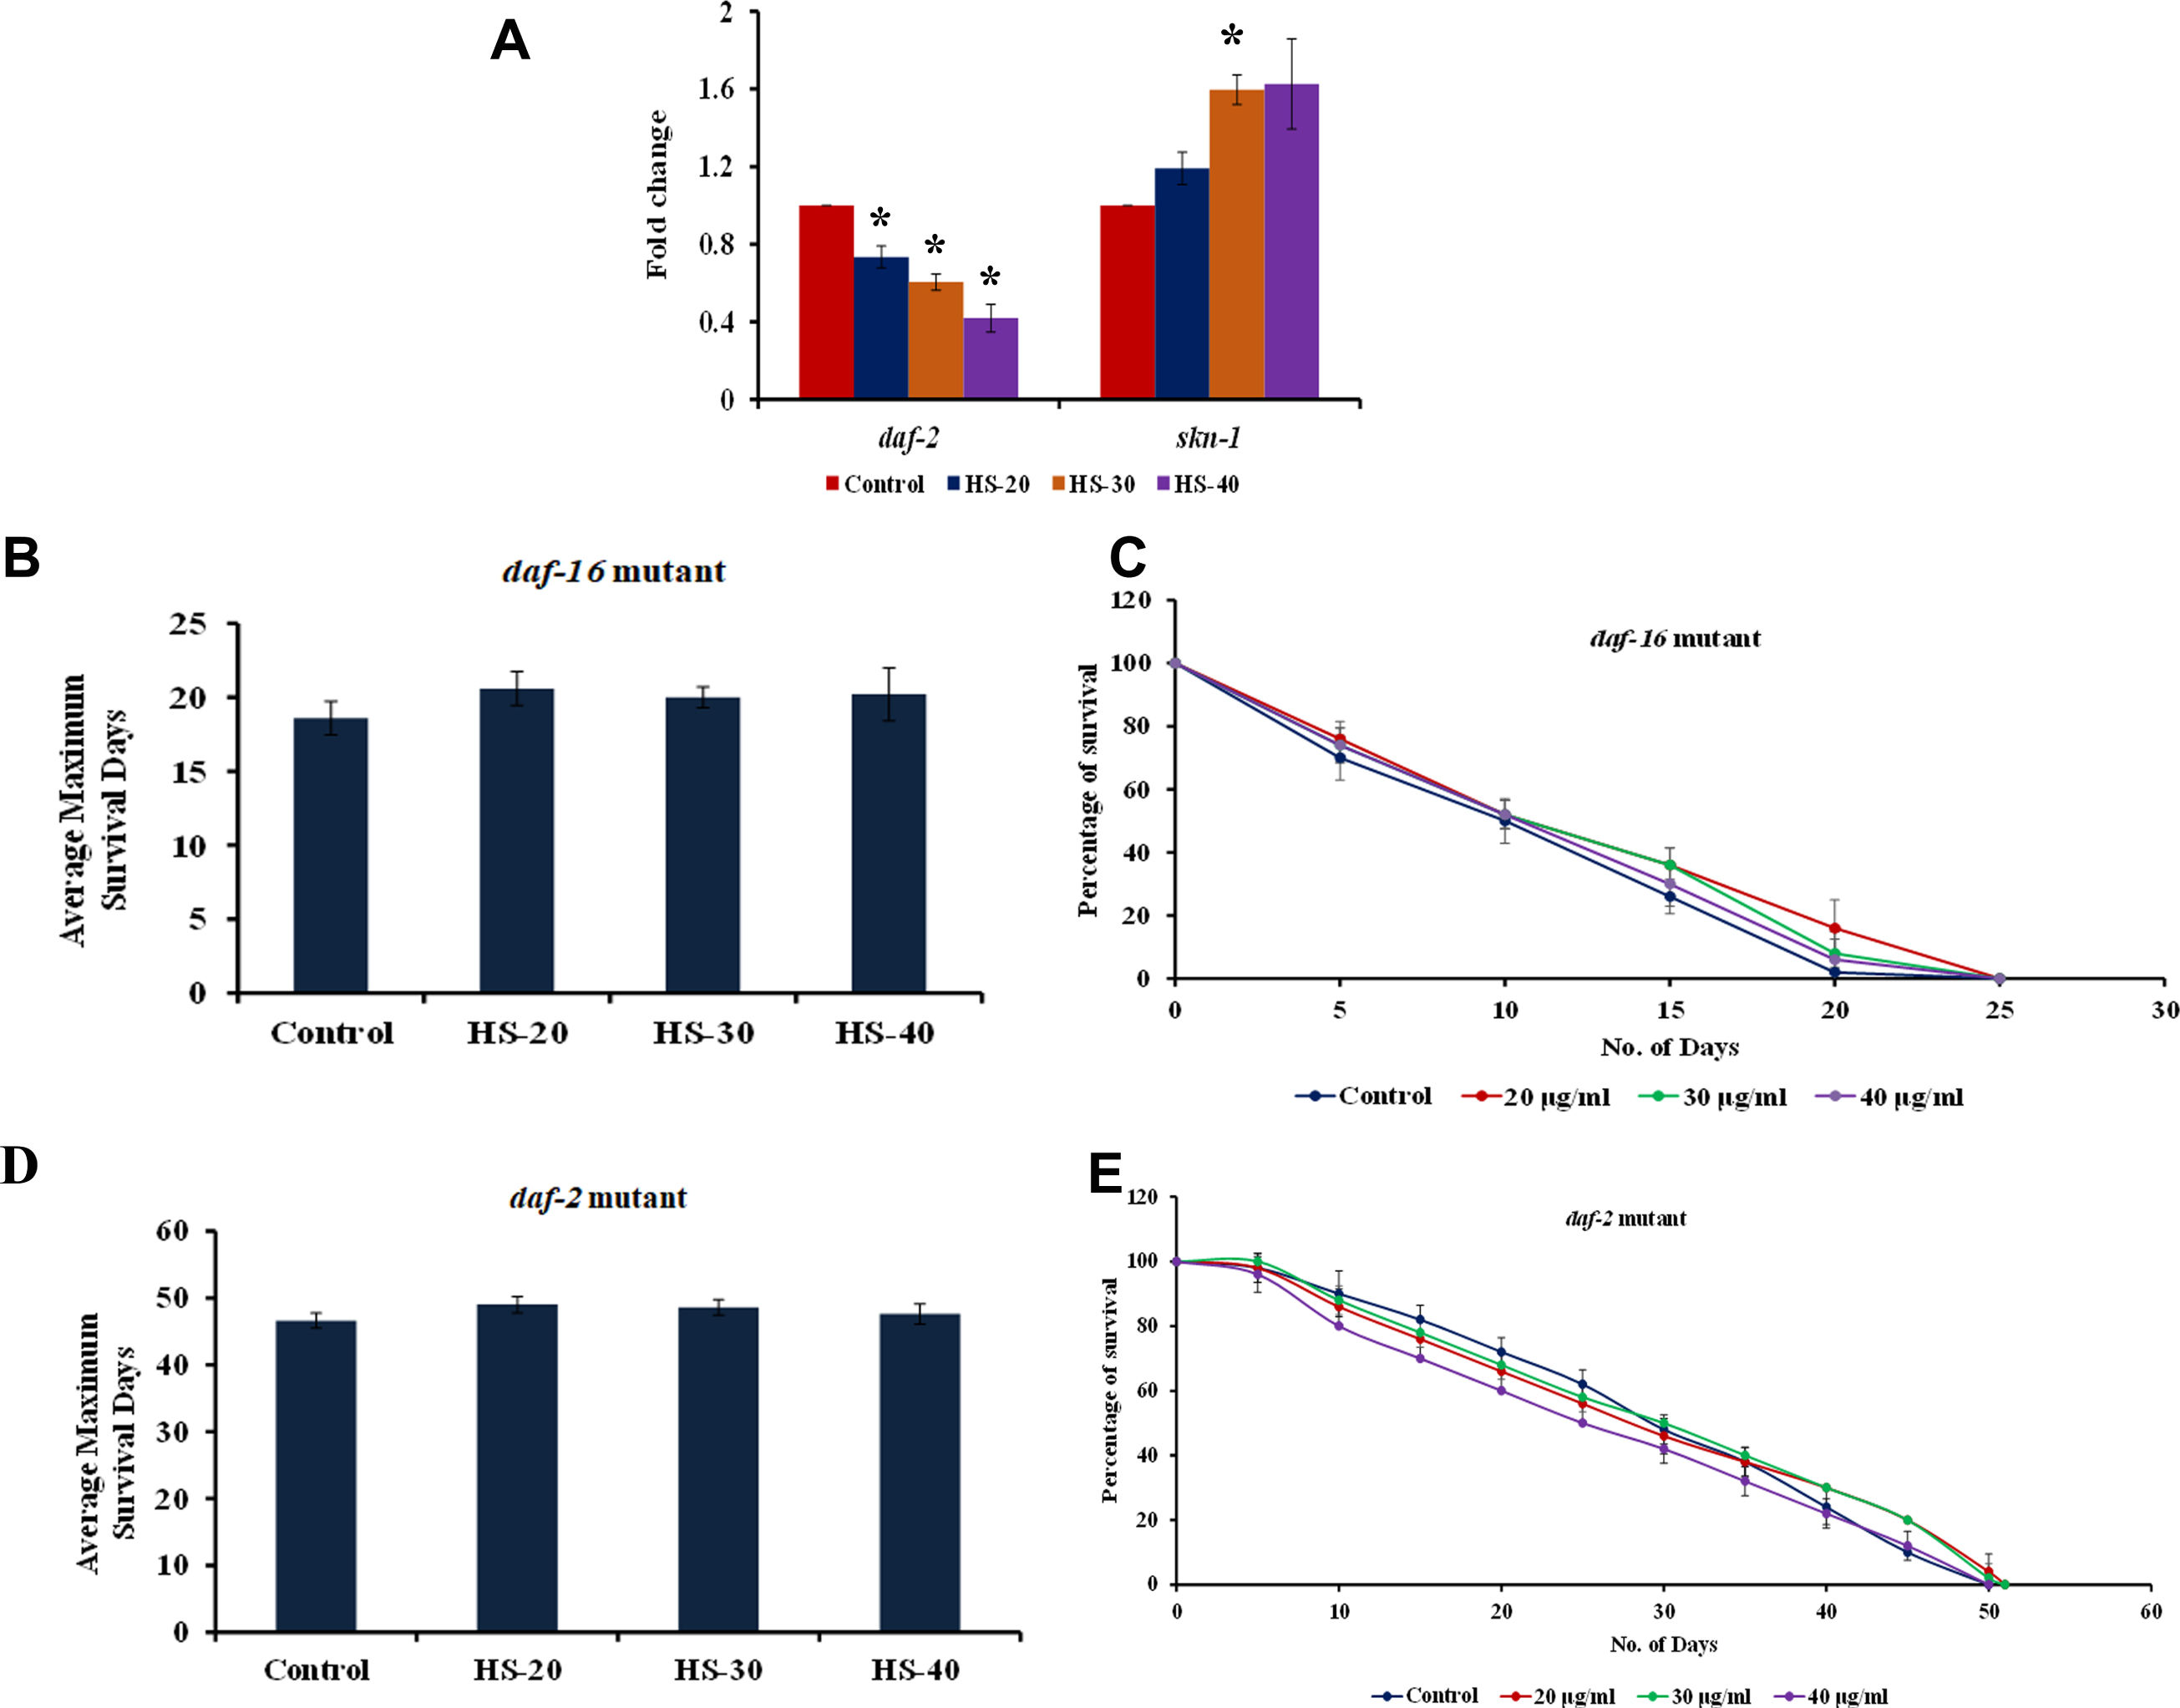 (A) Transcriptional regulation of antioxidant response gene skn-1 and lifespan extension related gene daf-2 by HS (B) Maximum lifespan of DAF-16 mutants upon treatment with varying concentration (20 –40μg/ml) of HS extract (C) Graphical representation of life span analysis by HS extract (20 –40μg/ml) in DAF-16 mutants (D) Maximum lifespan of DAF-2 mutants upon treatment with varying concentration (20 –40μg/ml) of HS extract (C) Graphical representation of life span analysis by HS extract (20 –40μg/ml) in DAF-2 mutants (* significant level at p < 0.05).